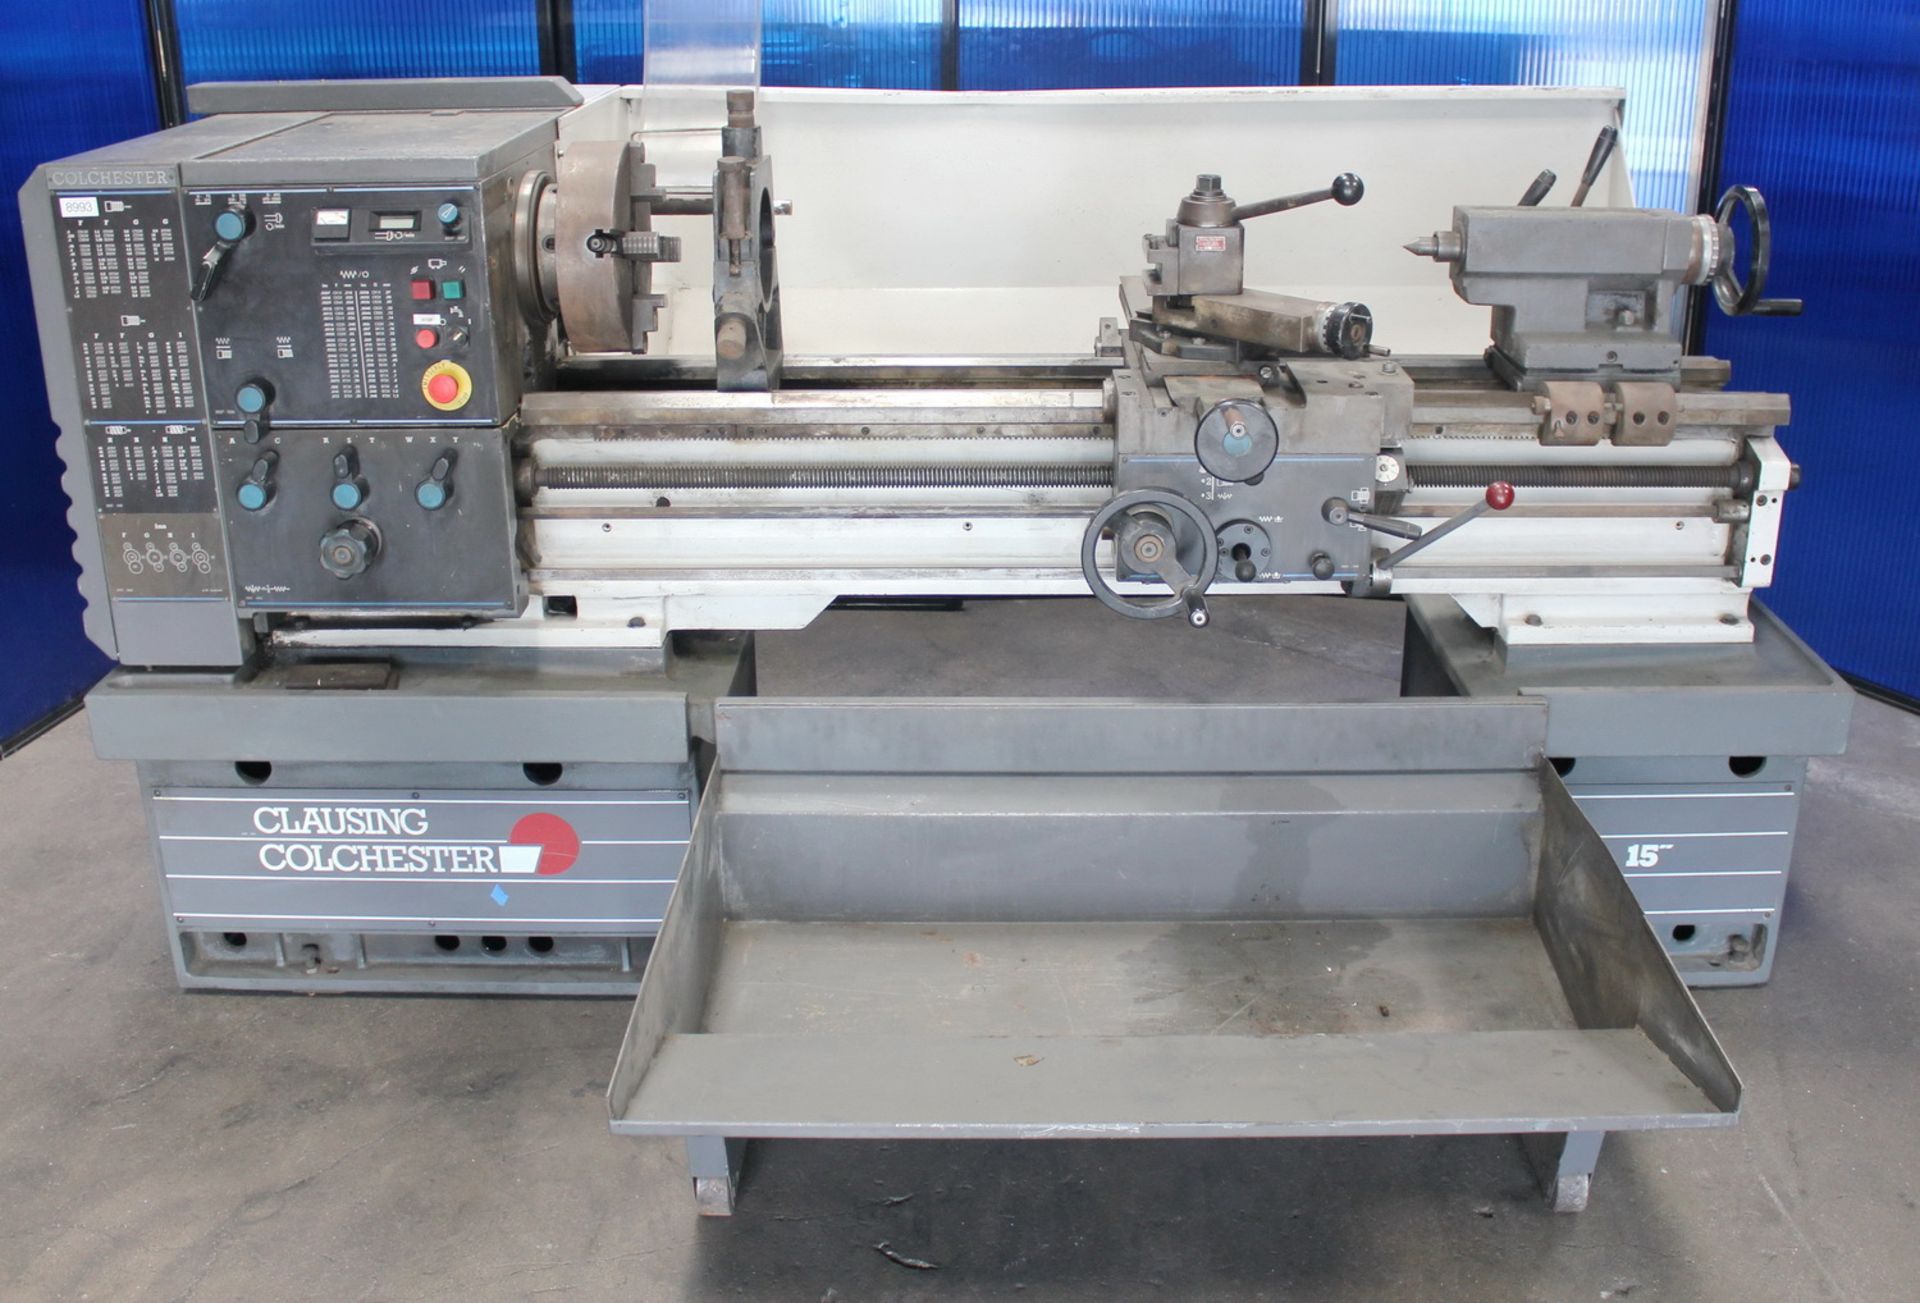 Clausing Colchester Engine Lathe | 15" x 50", Mdl: Triump-15VS, S/N: LVT50S11JV/05274, Located In: